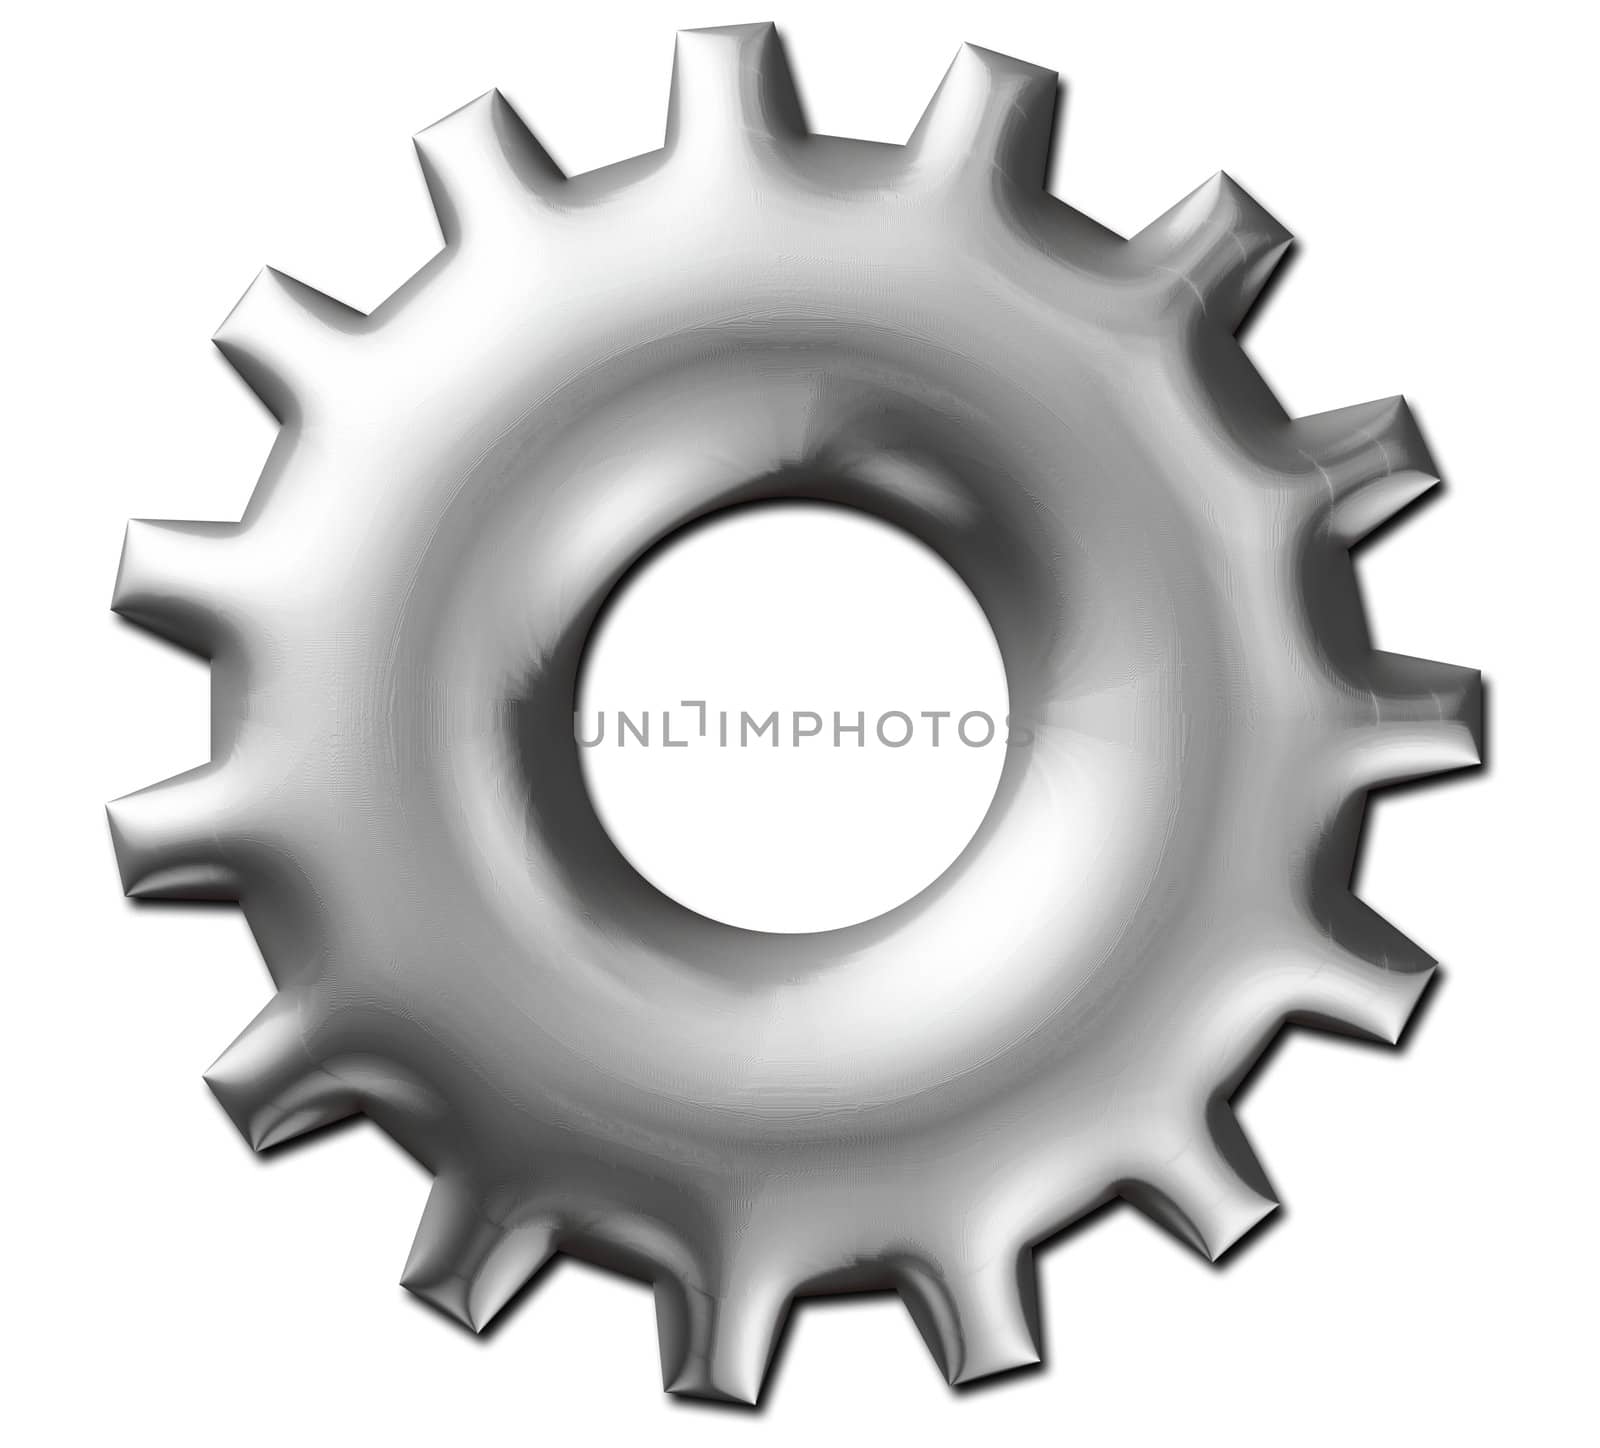 3d rendered illustration. Abstract mechanism. 3d gear wheel isolated on white background.